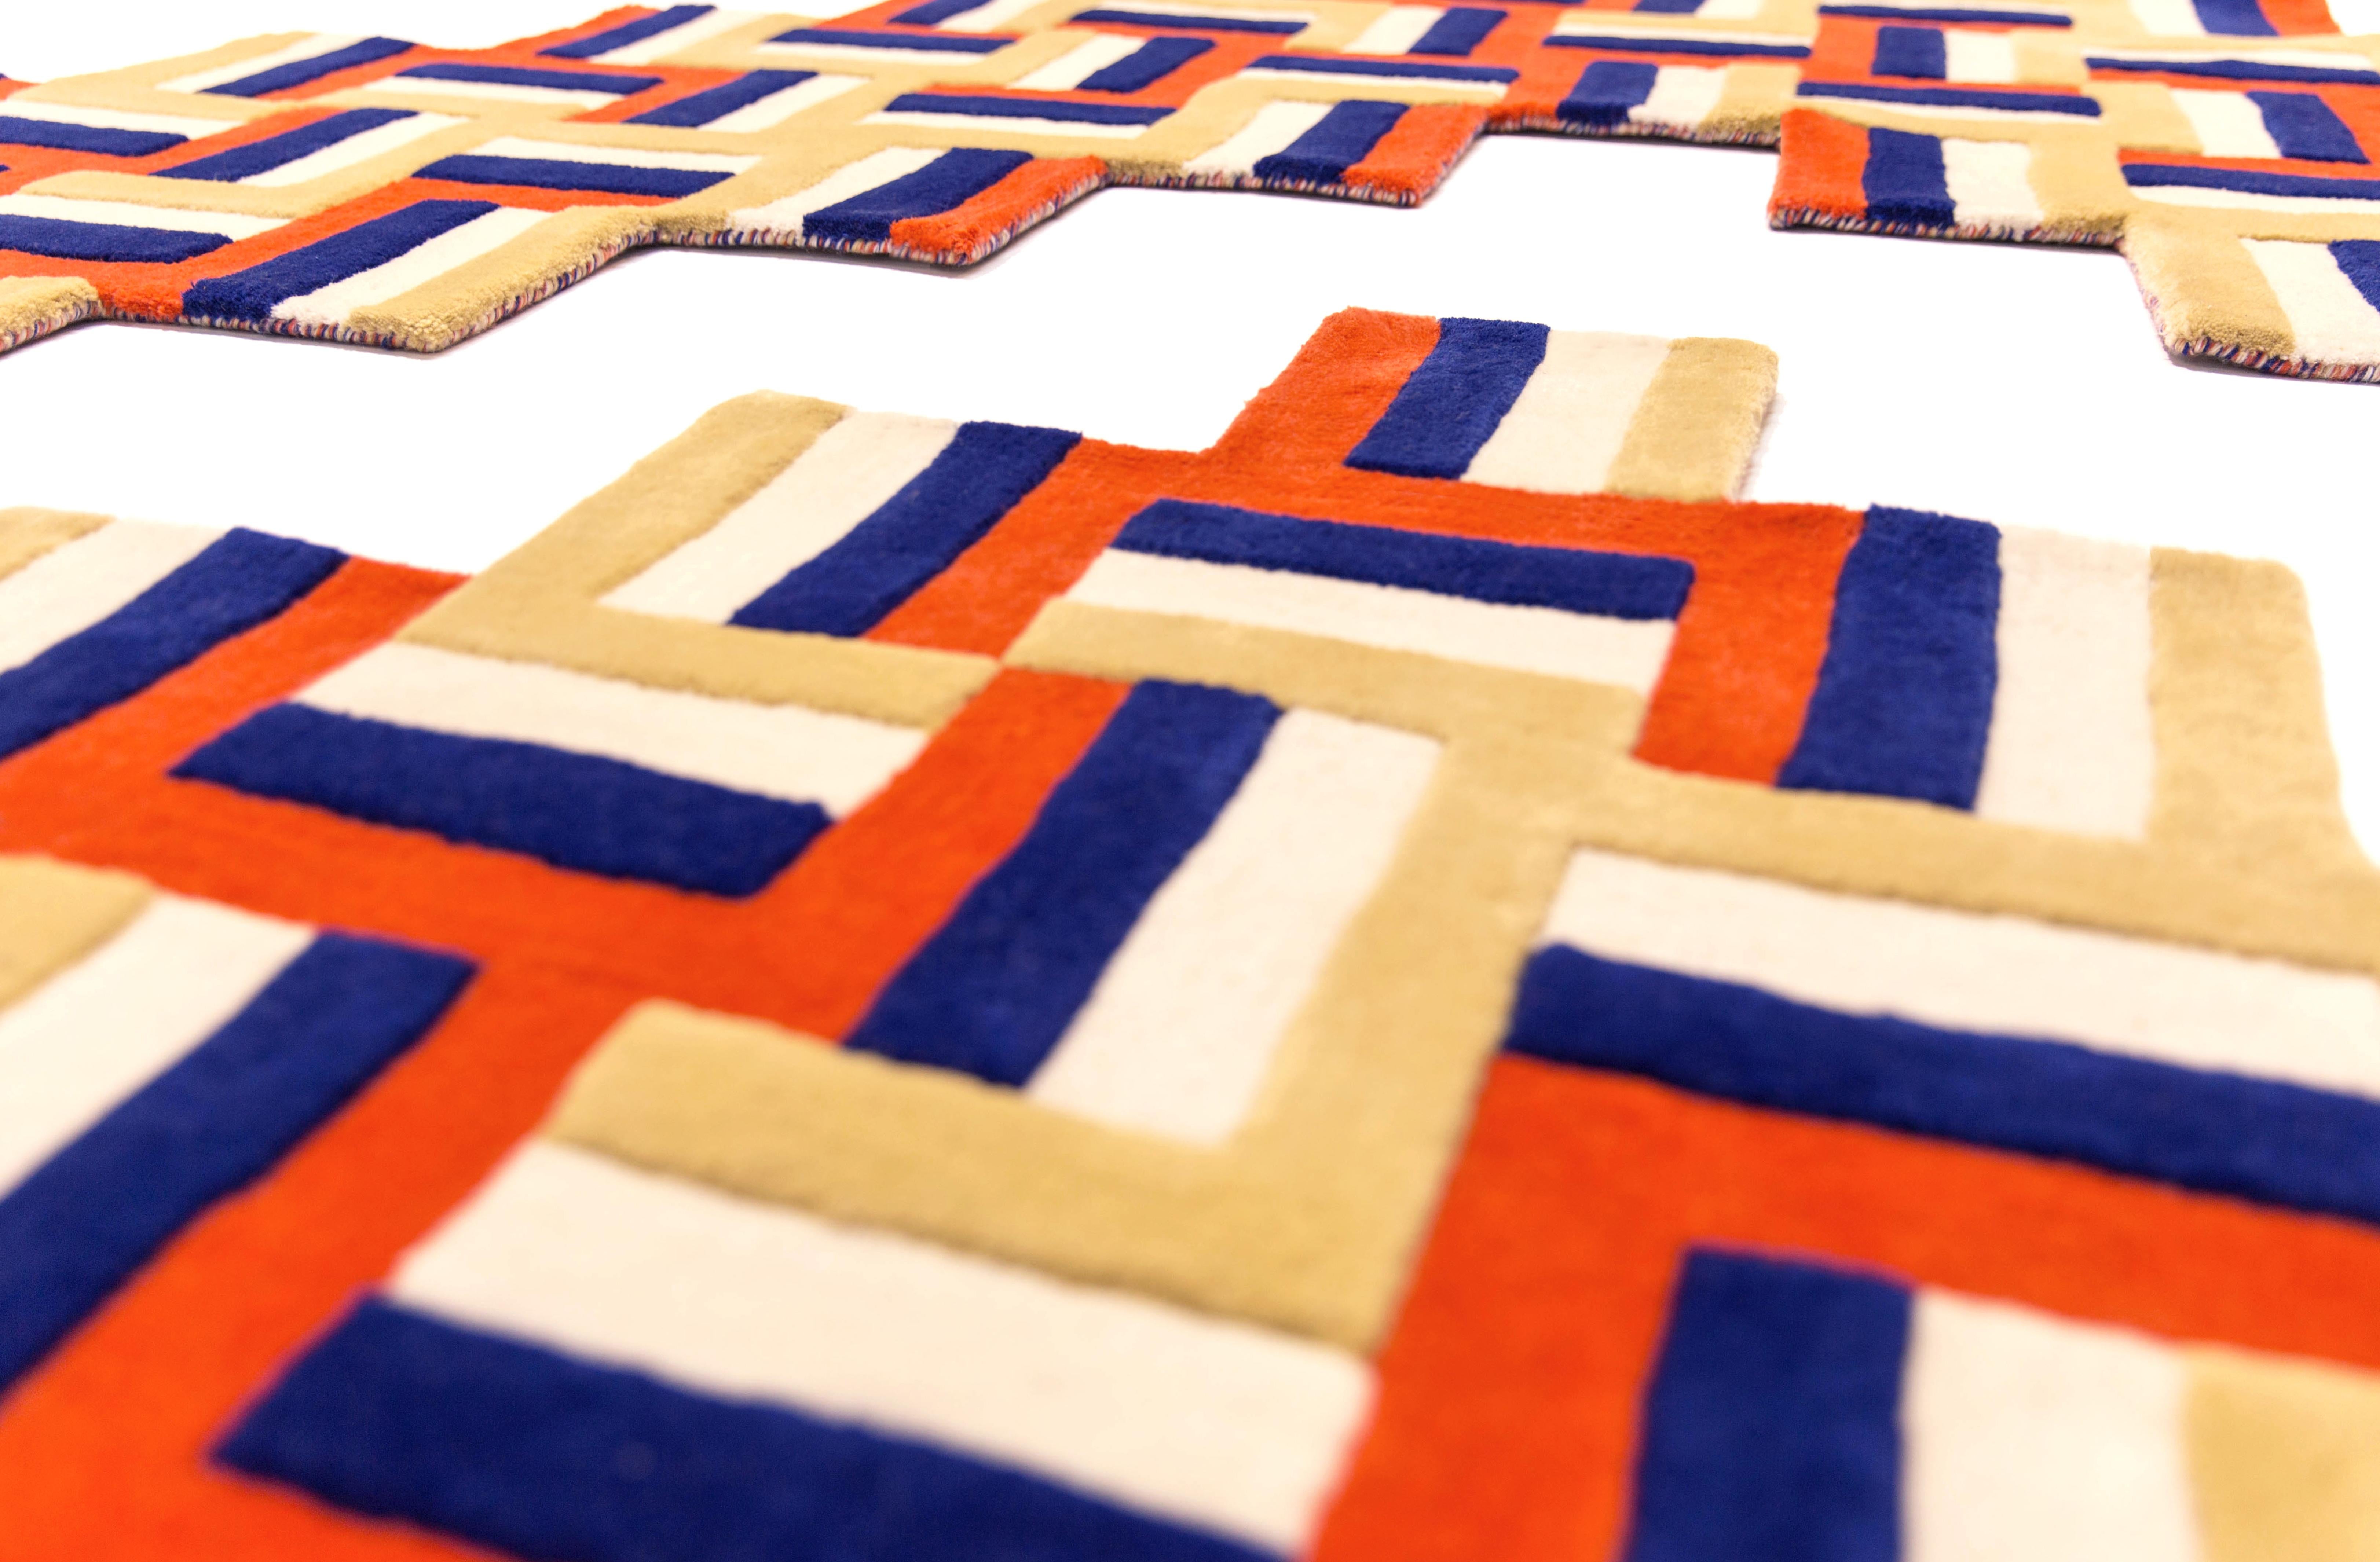 Cross is an innovative rug system with graphic lines. Inspired by a giant crossing
of colorful stripes, it is made of different square units which layout and number
will determinate the size and shape of the rug. The elegant mix of navy